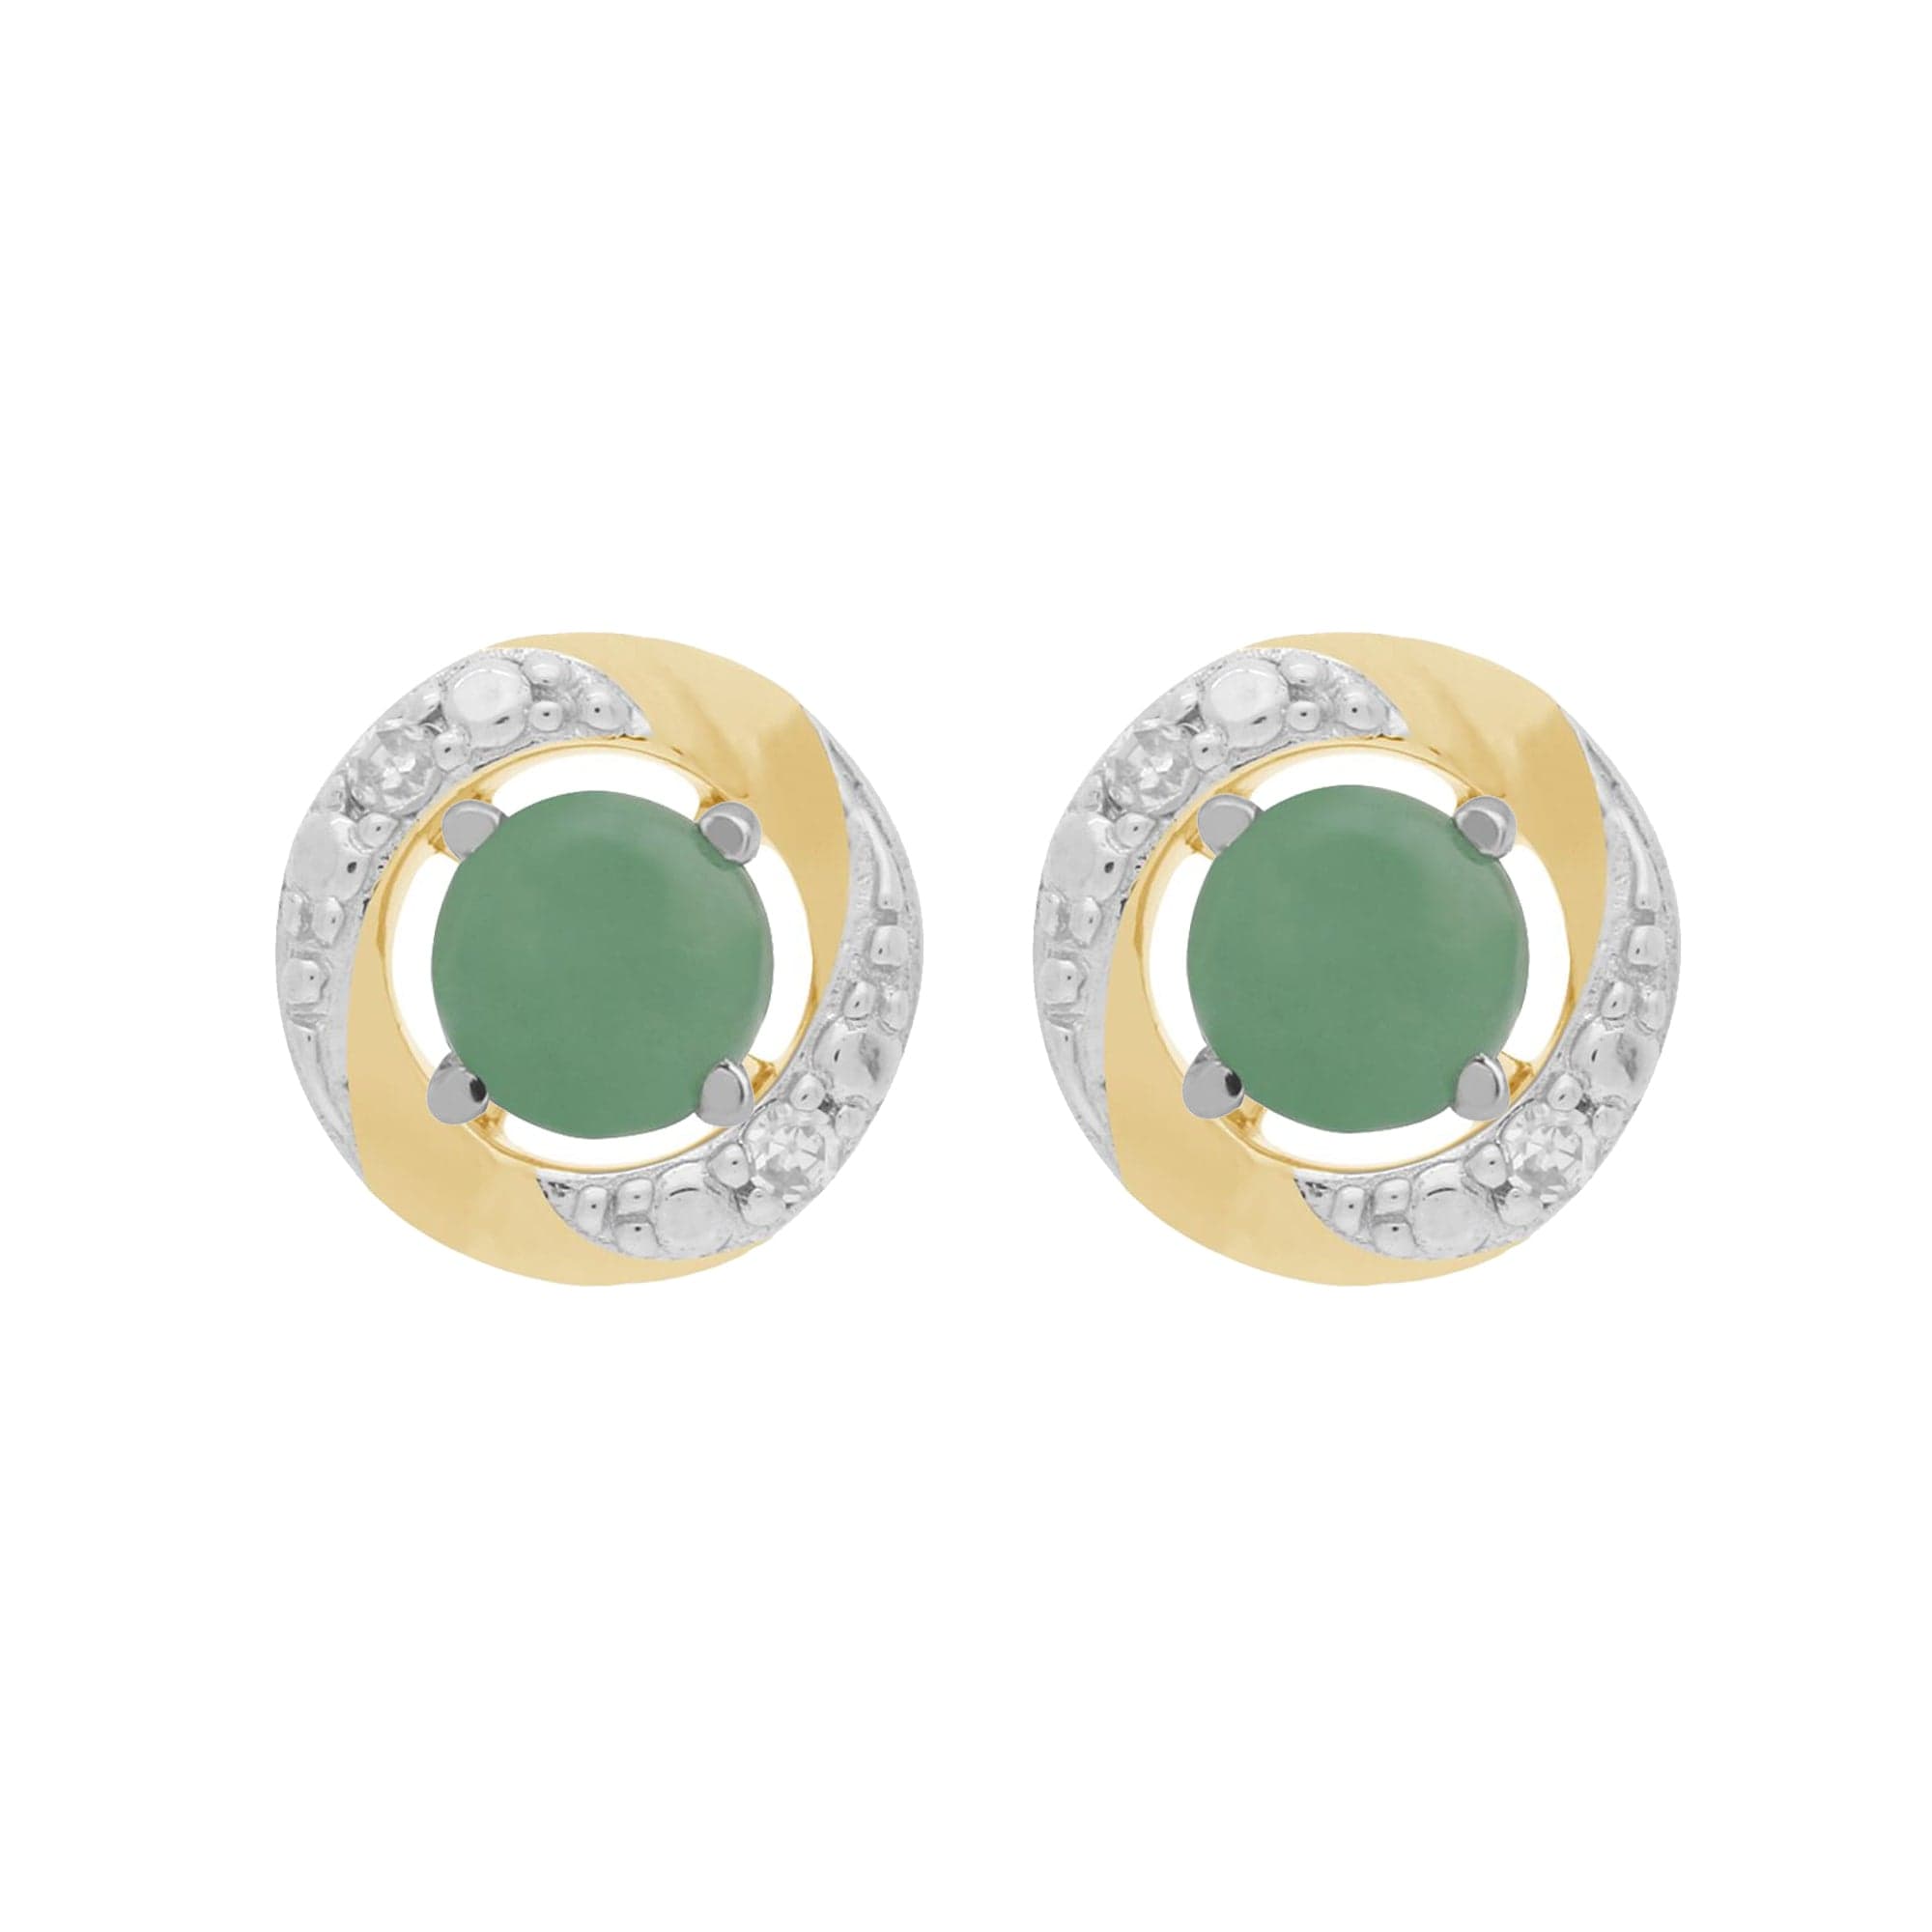 162E0071149-191E0374019 9ct White Gold Jade Stud Earrings with Detachable Diamond Halo Ear Jacket in 9ct Yellow Gold 1